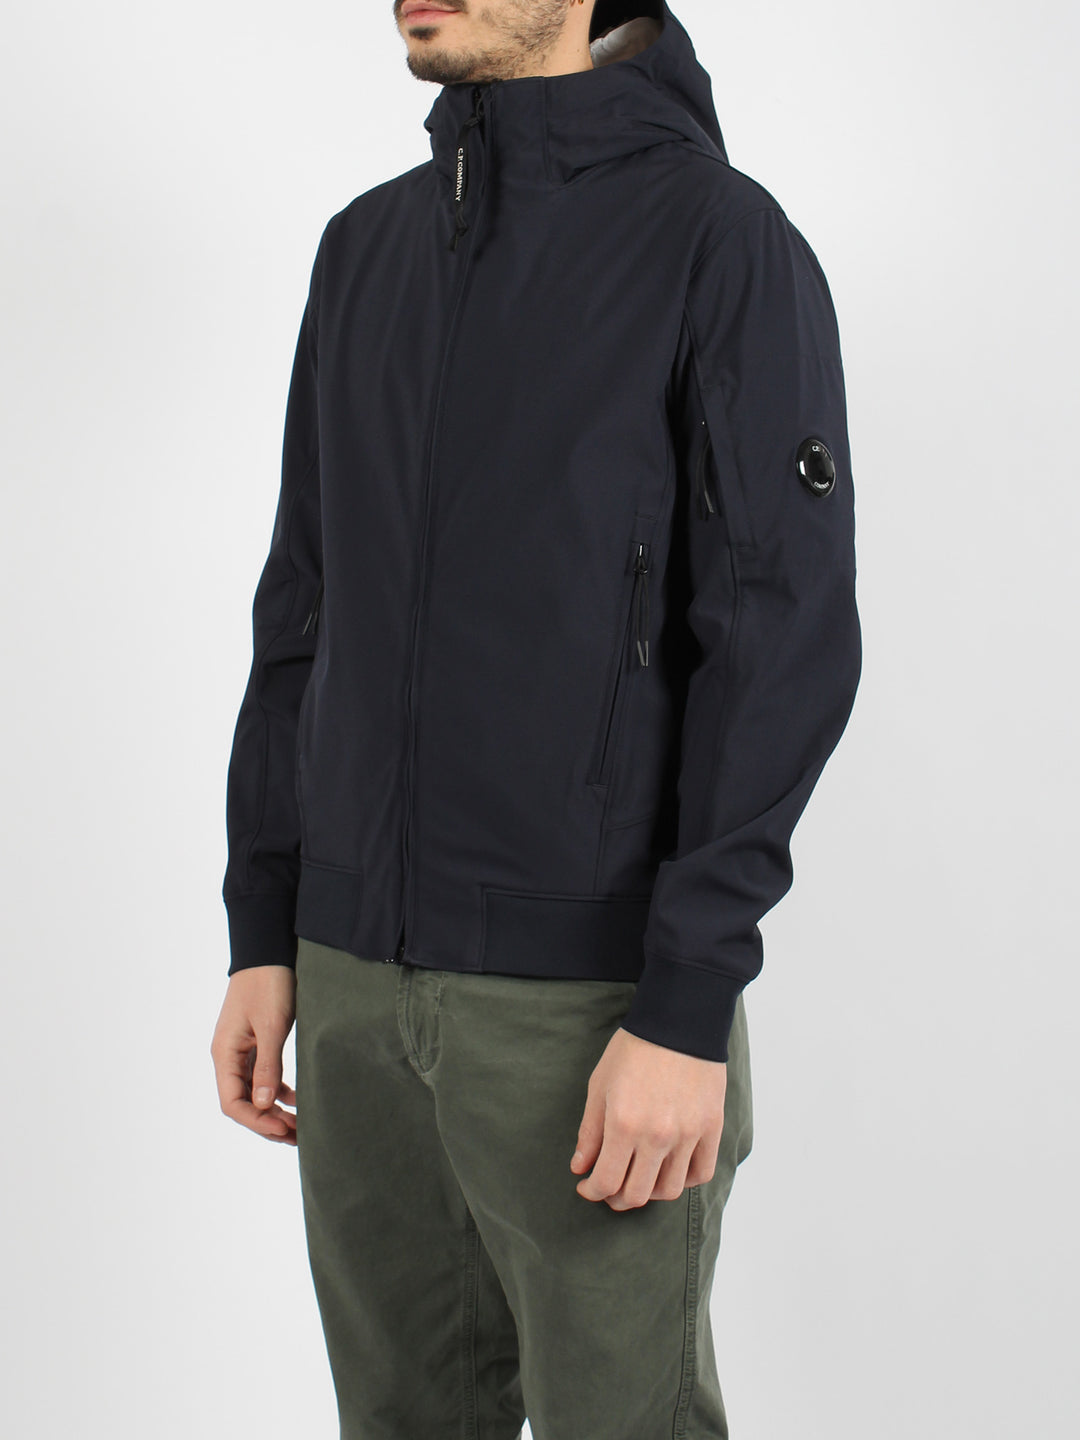 C.p. shell-r hooded jacket